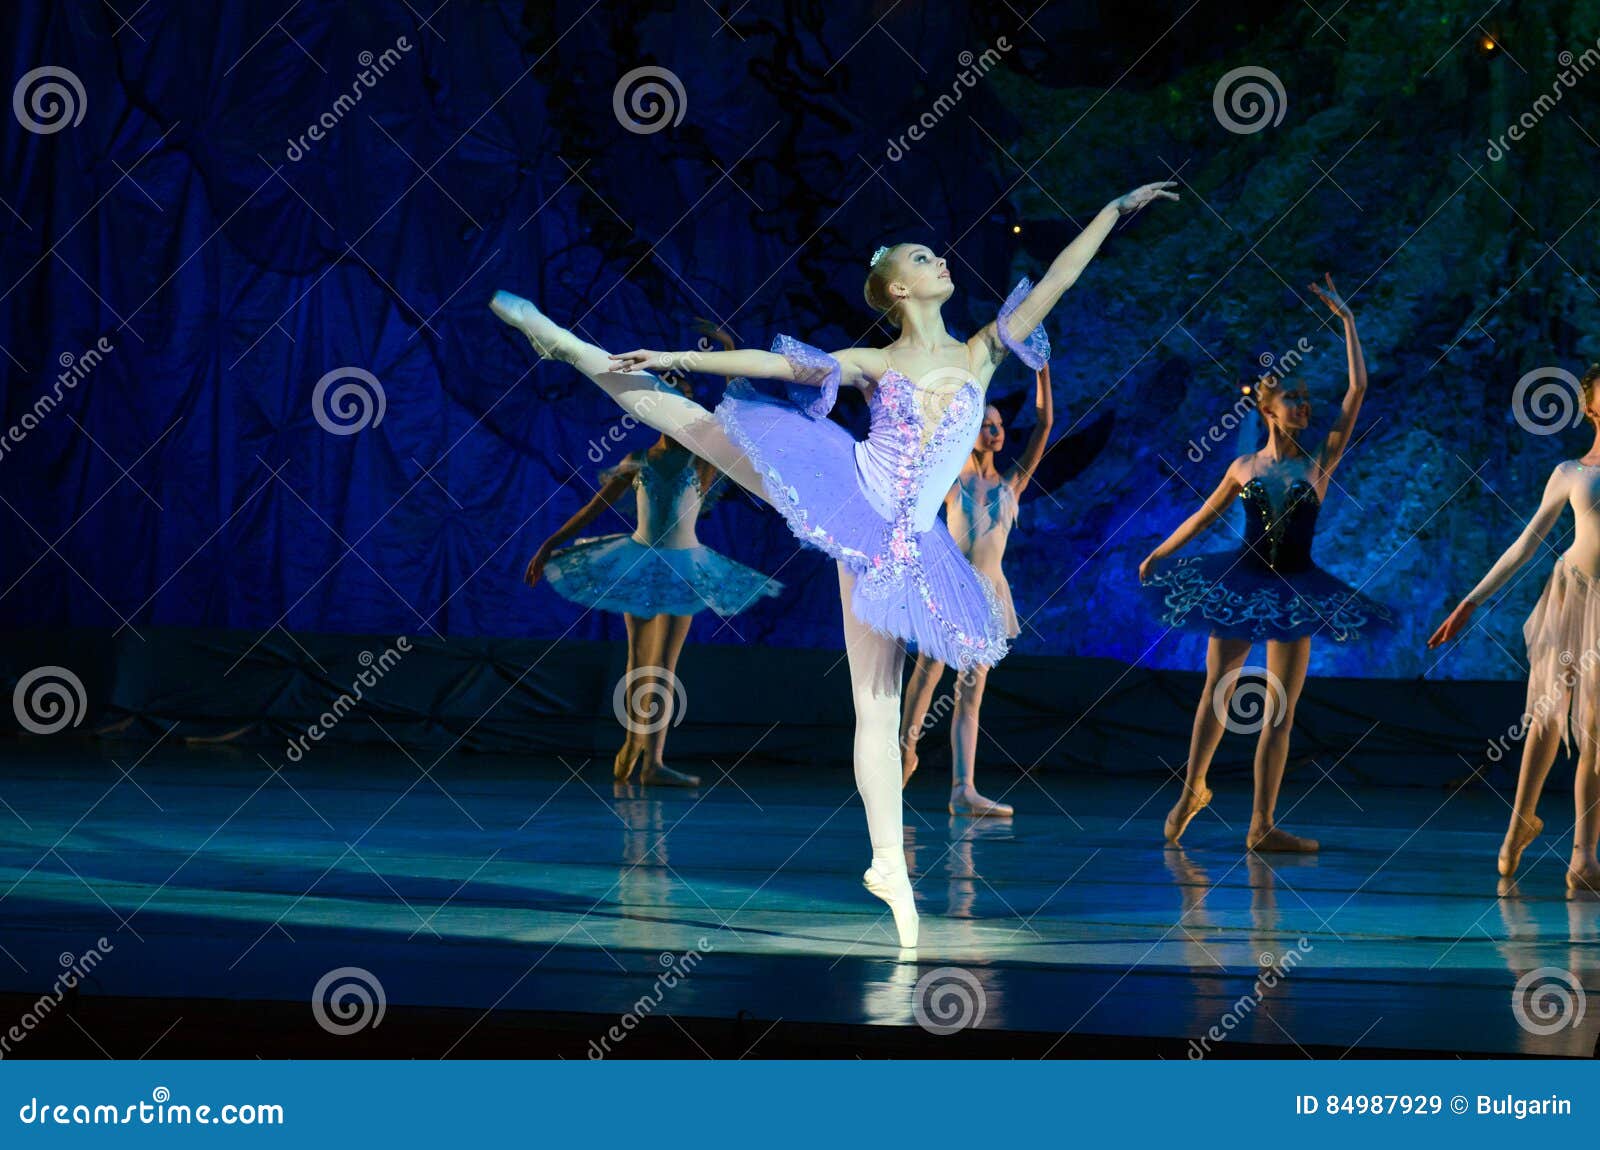 Ballet pearls editorial stock image. Image of ballet - 84987929